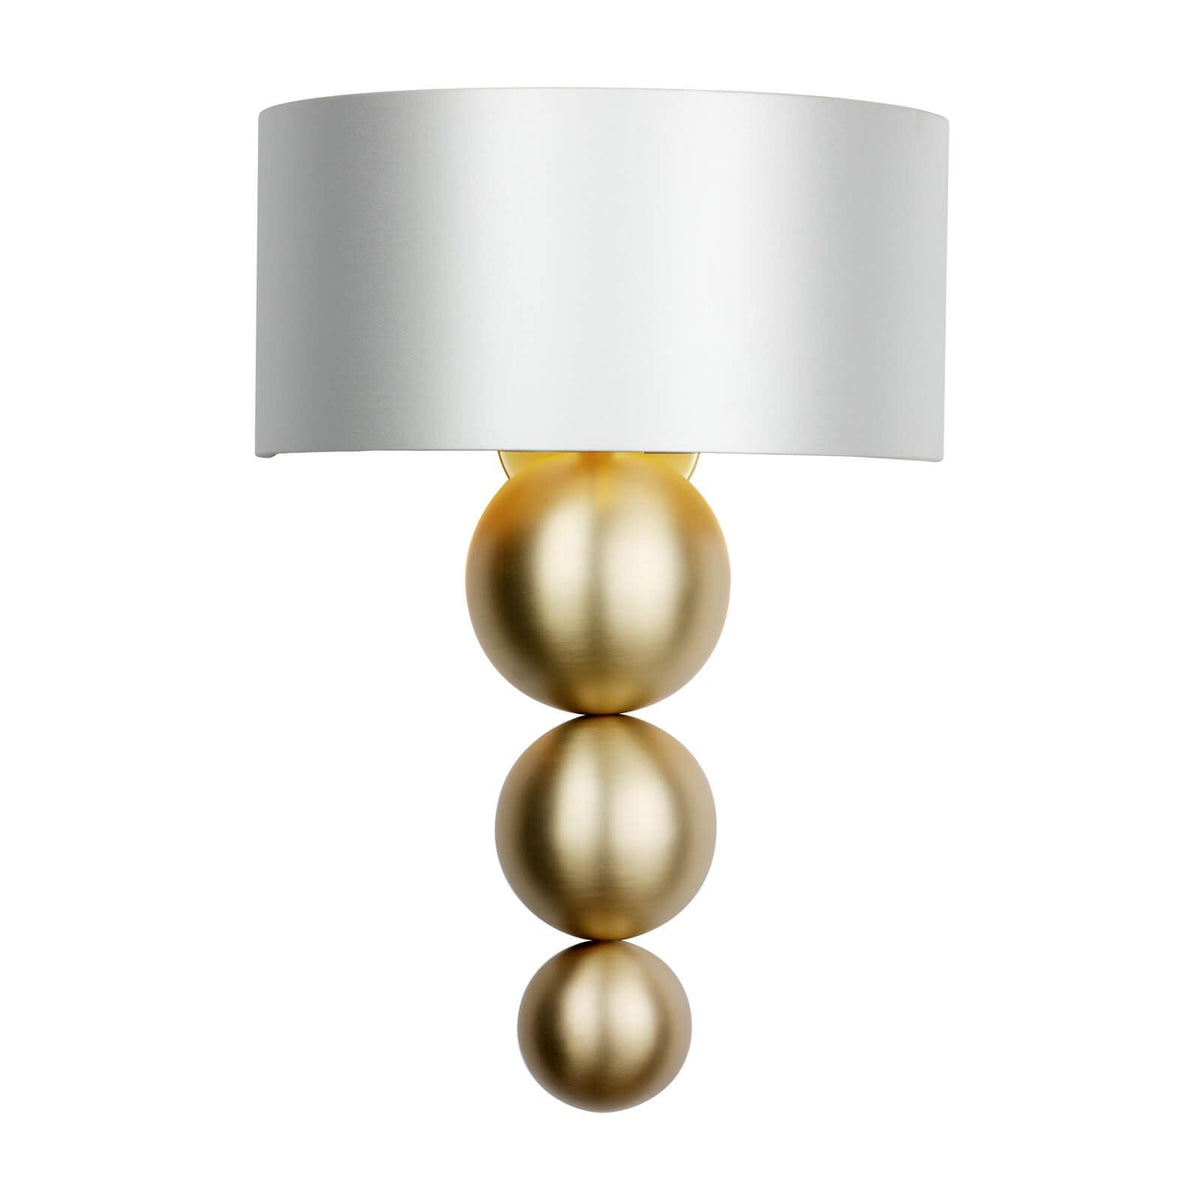 Athena single wall light in butter brass